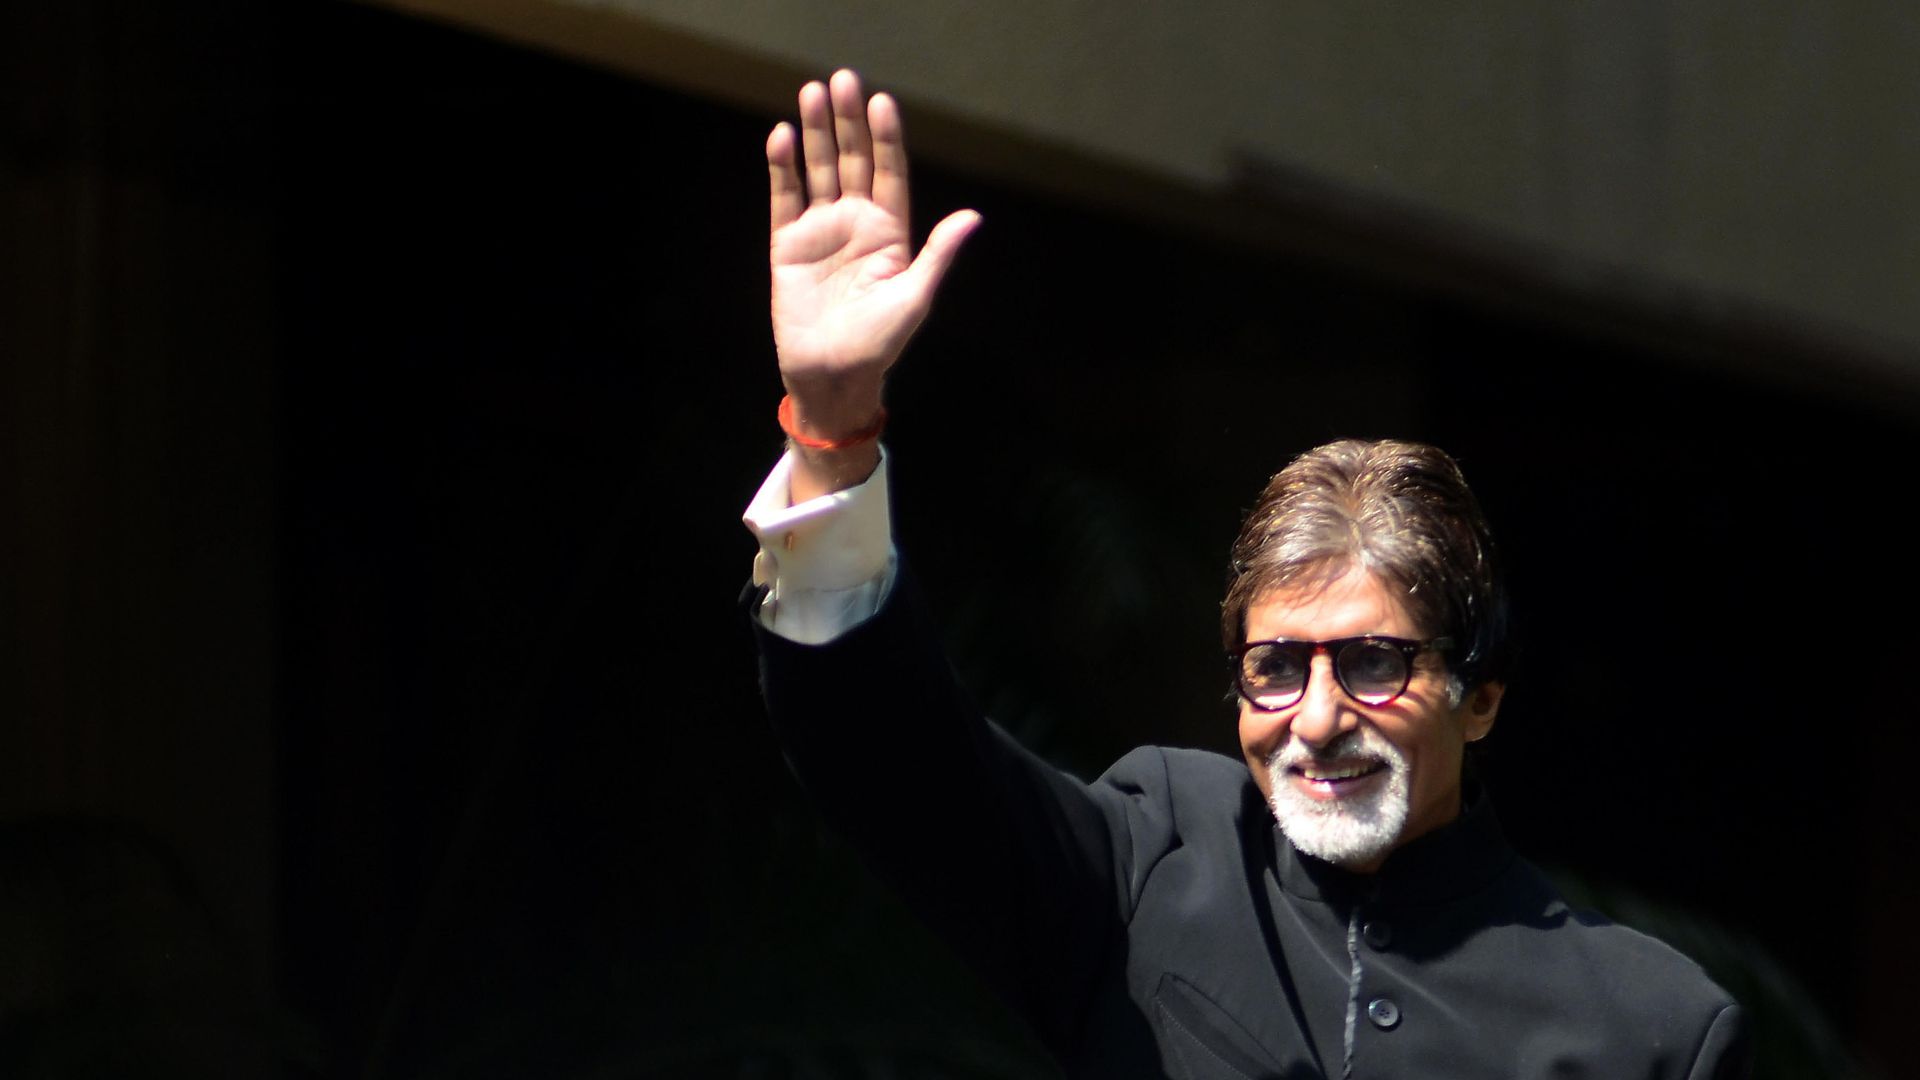 Amitabh Bachchan Wallpaper HD 1080P Laptop Full HD Wallpaper, HD Celebrities 4K Wallpaper, Image, Photo and Background